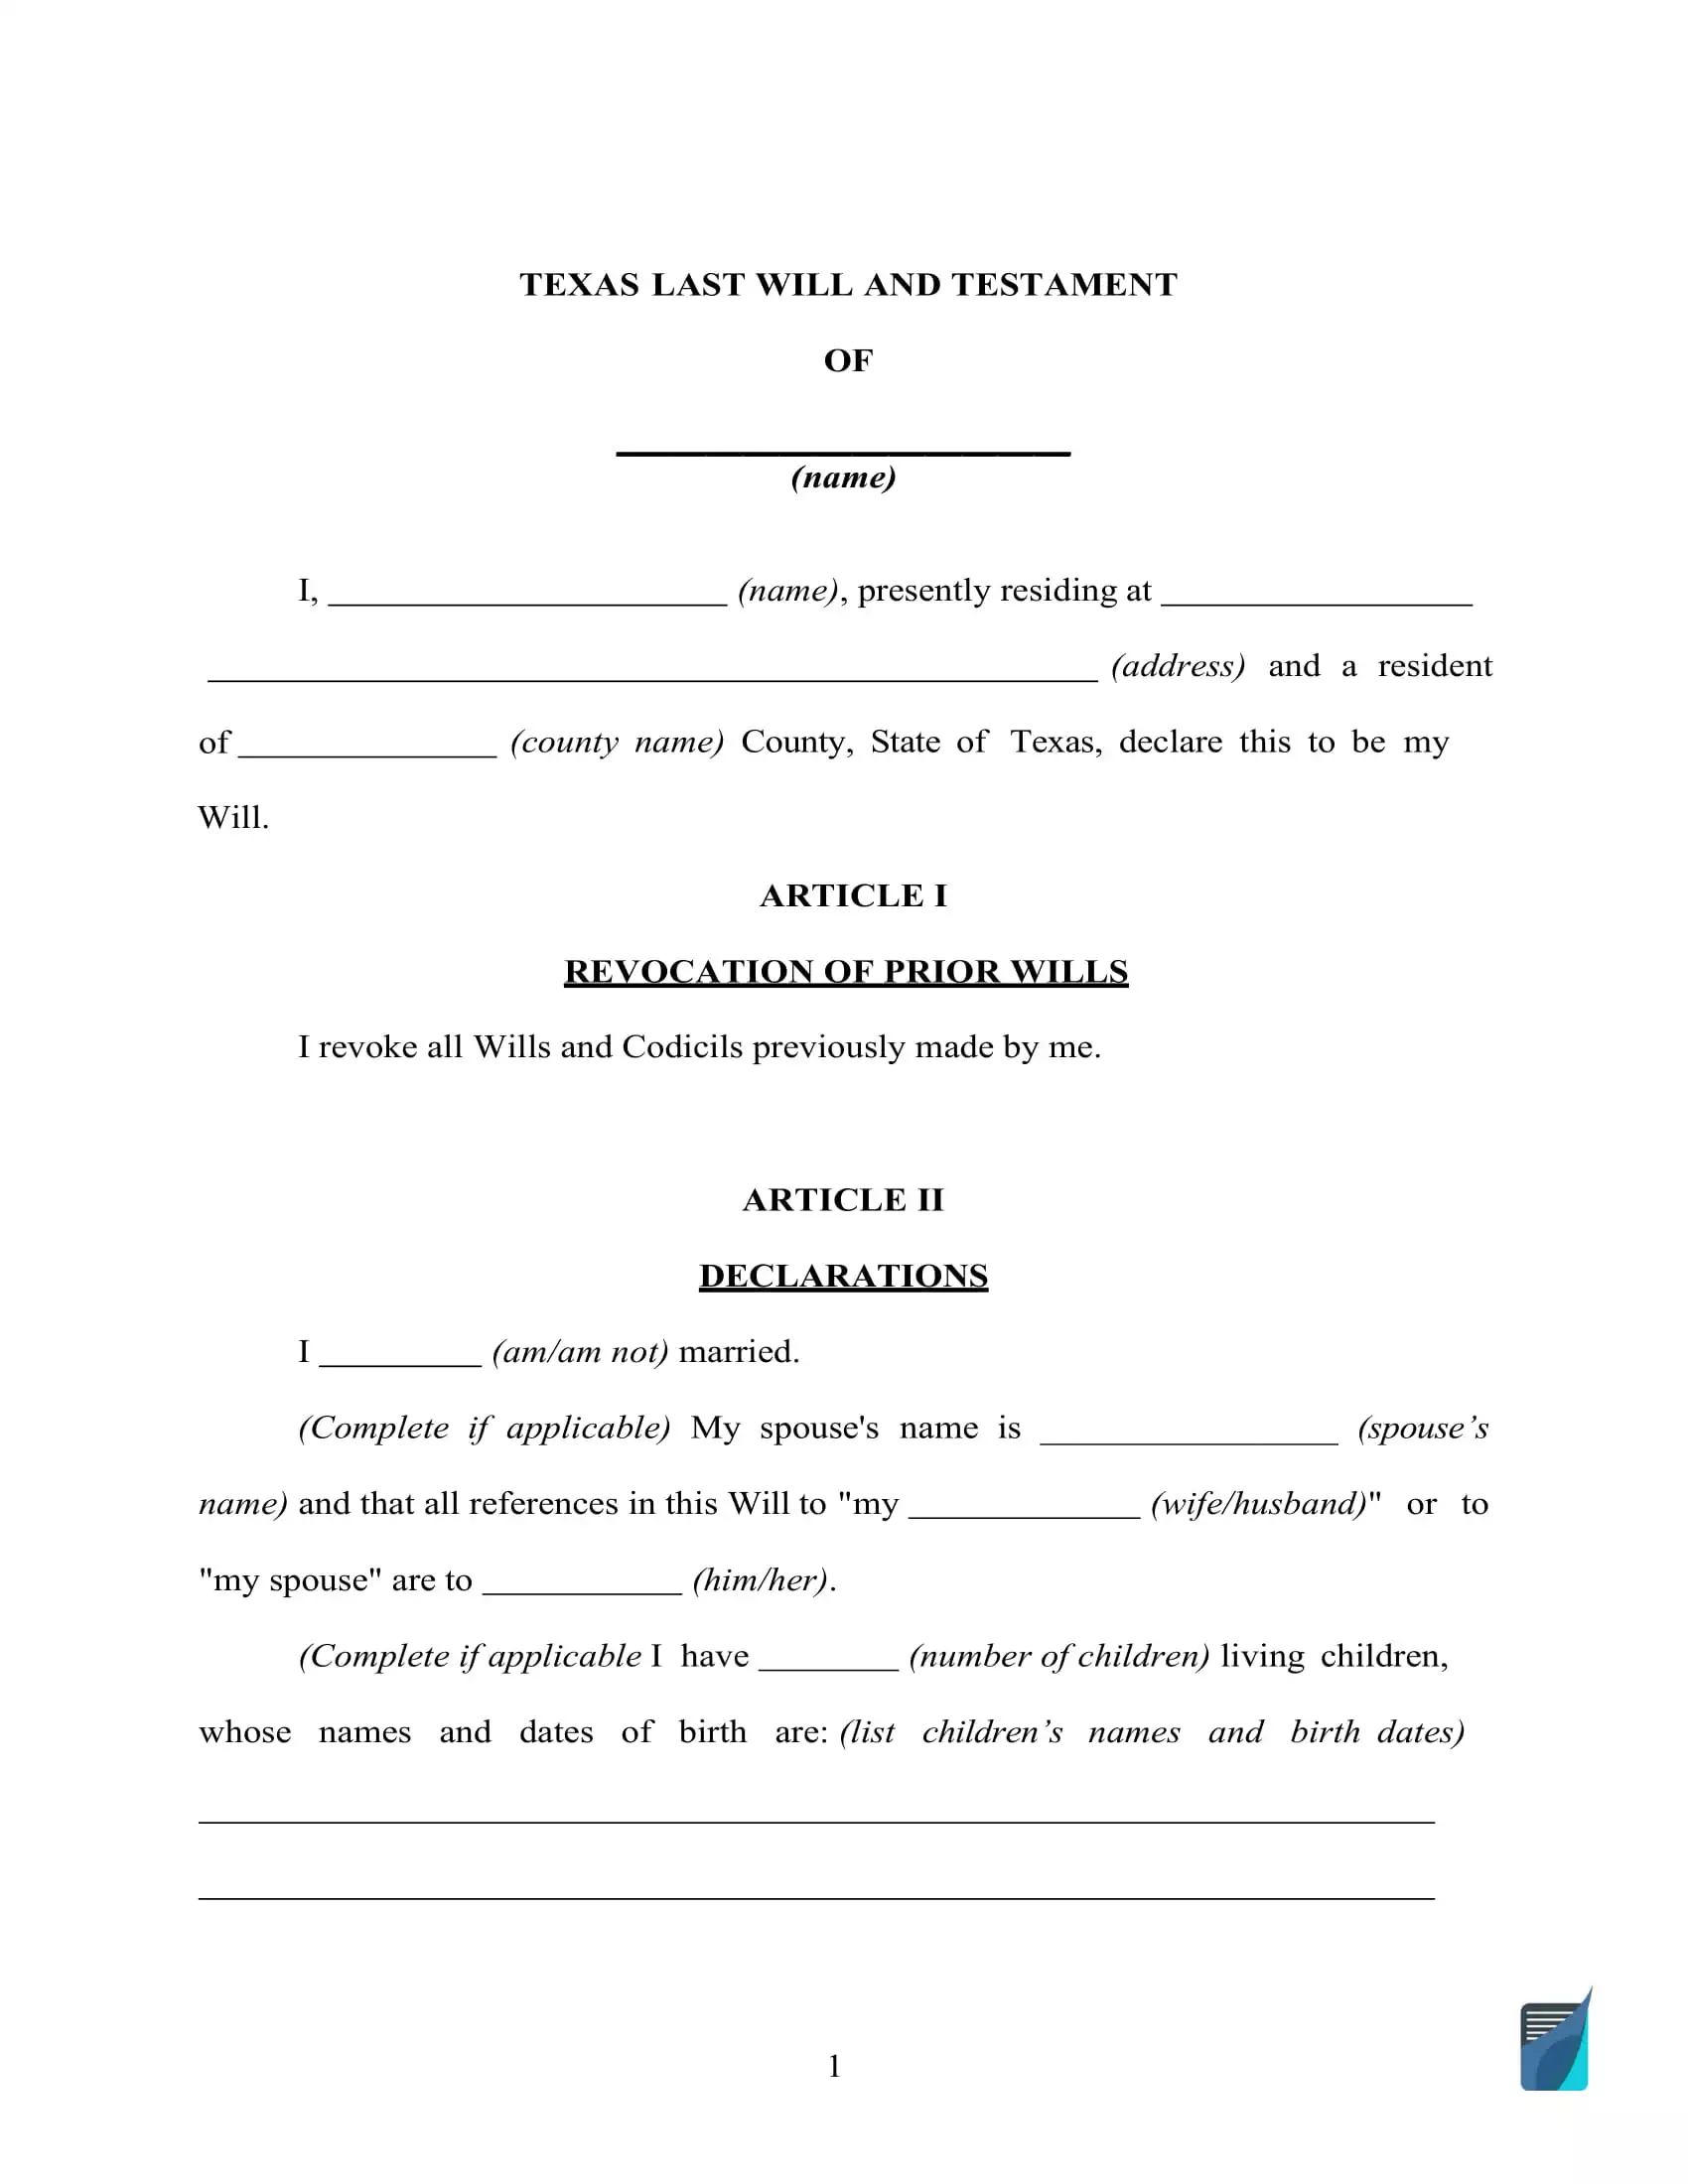 texas-last-will-and-testament-template